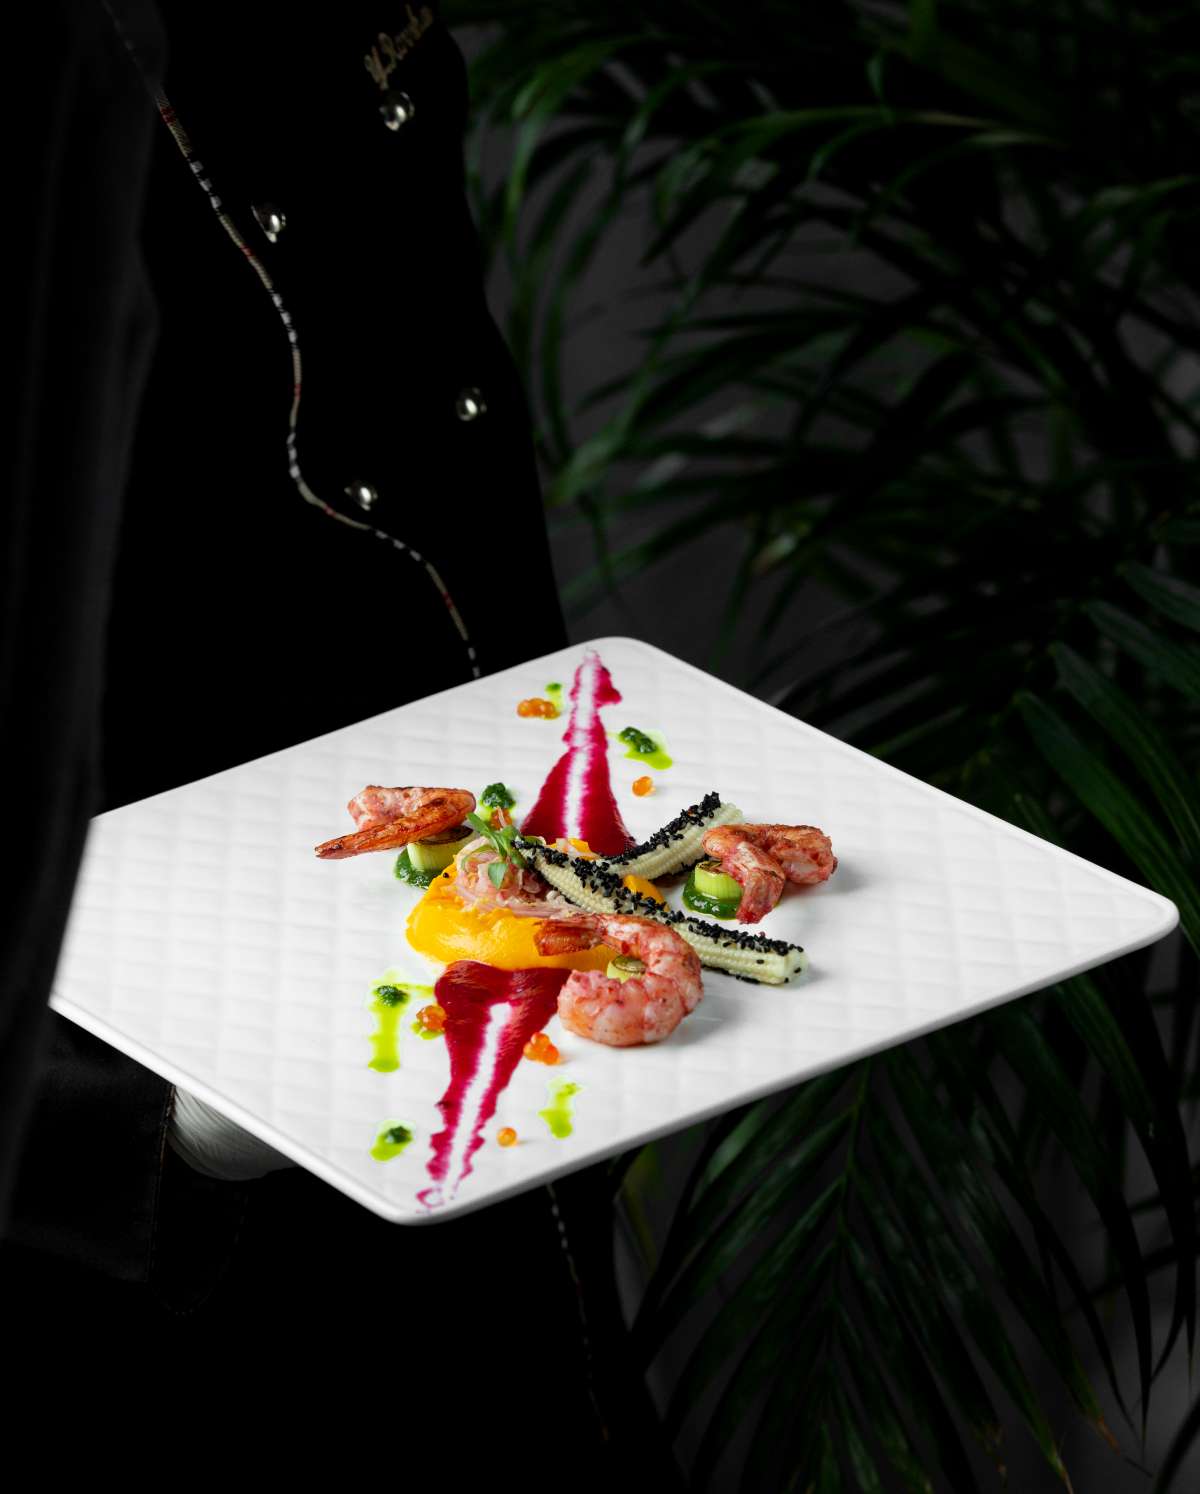 Craft culinary masterpieces with the power of beautiful plating